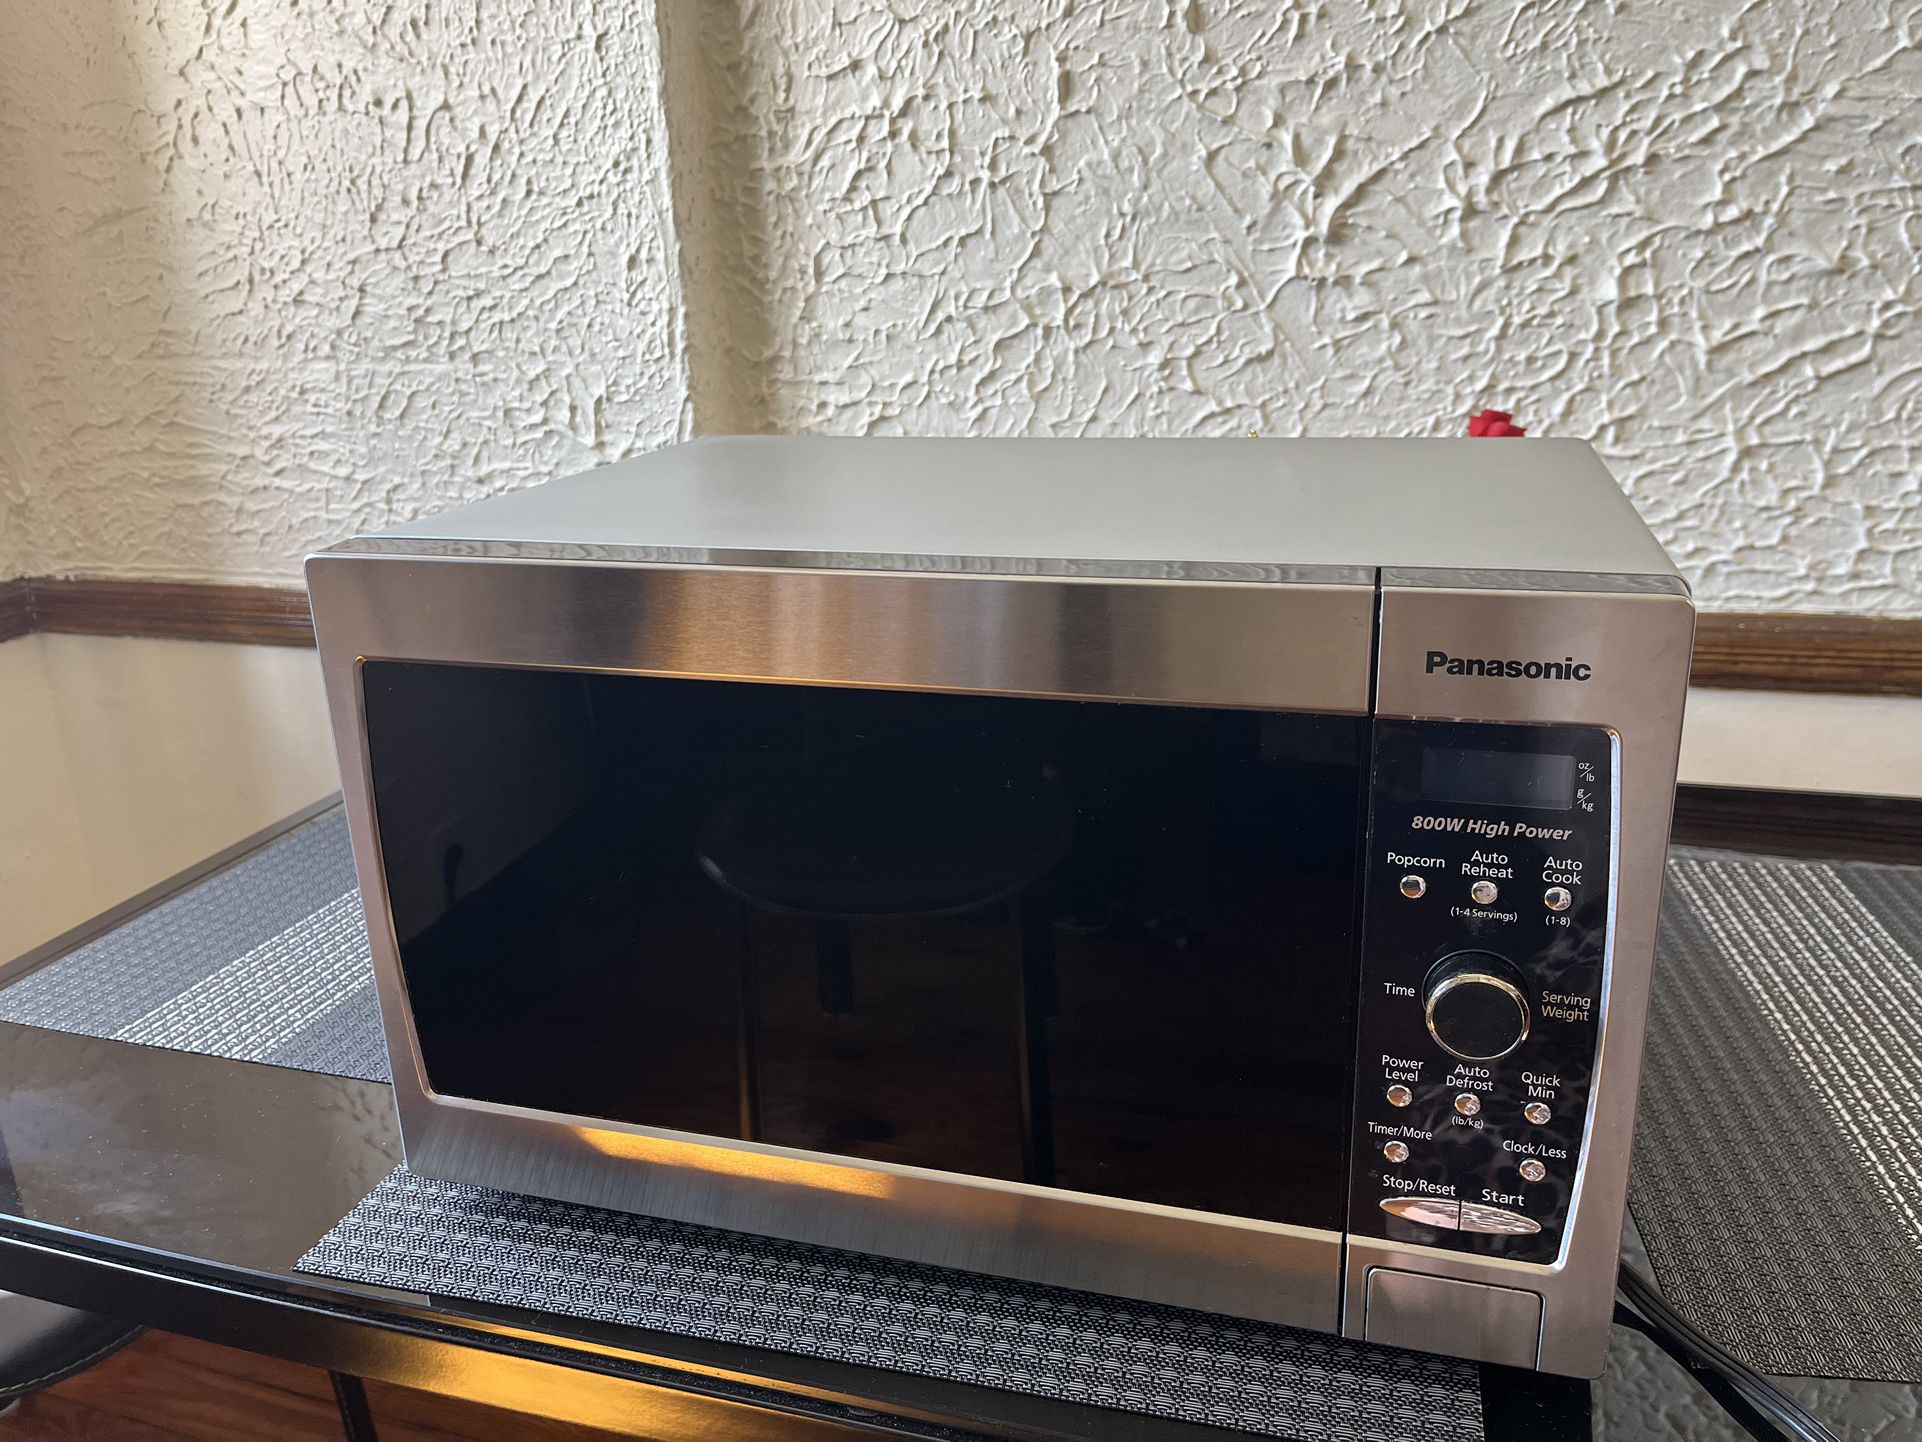 Microwave for sale for Sale in Queens, NY - OfferUp